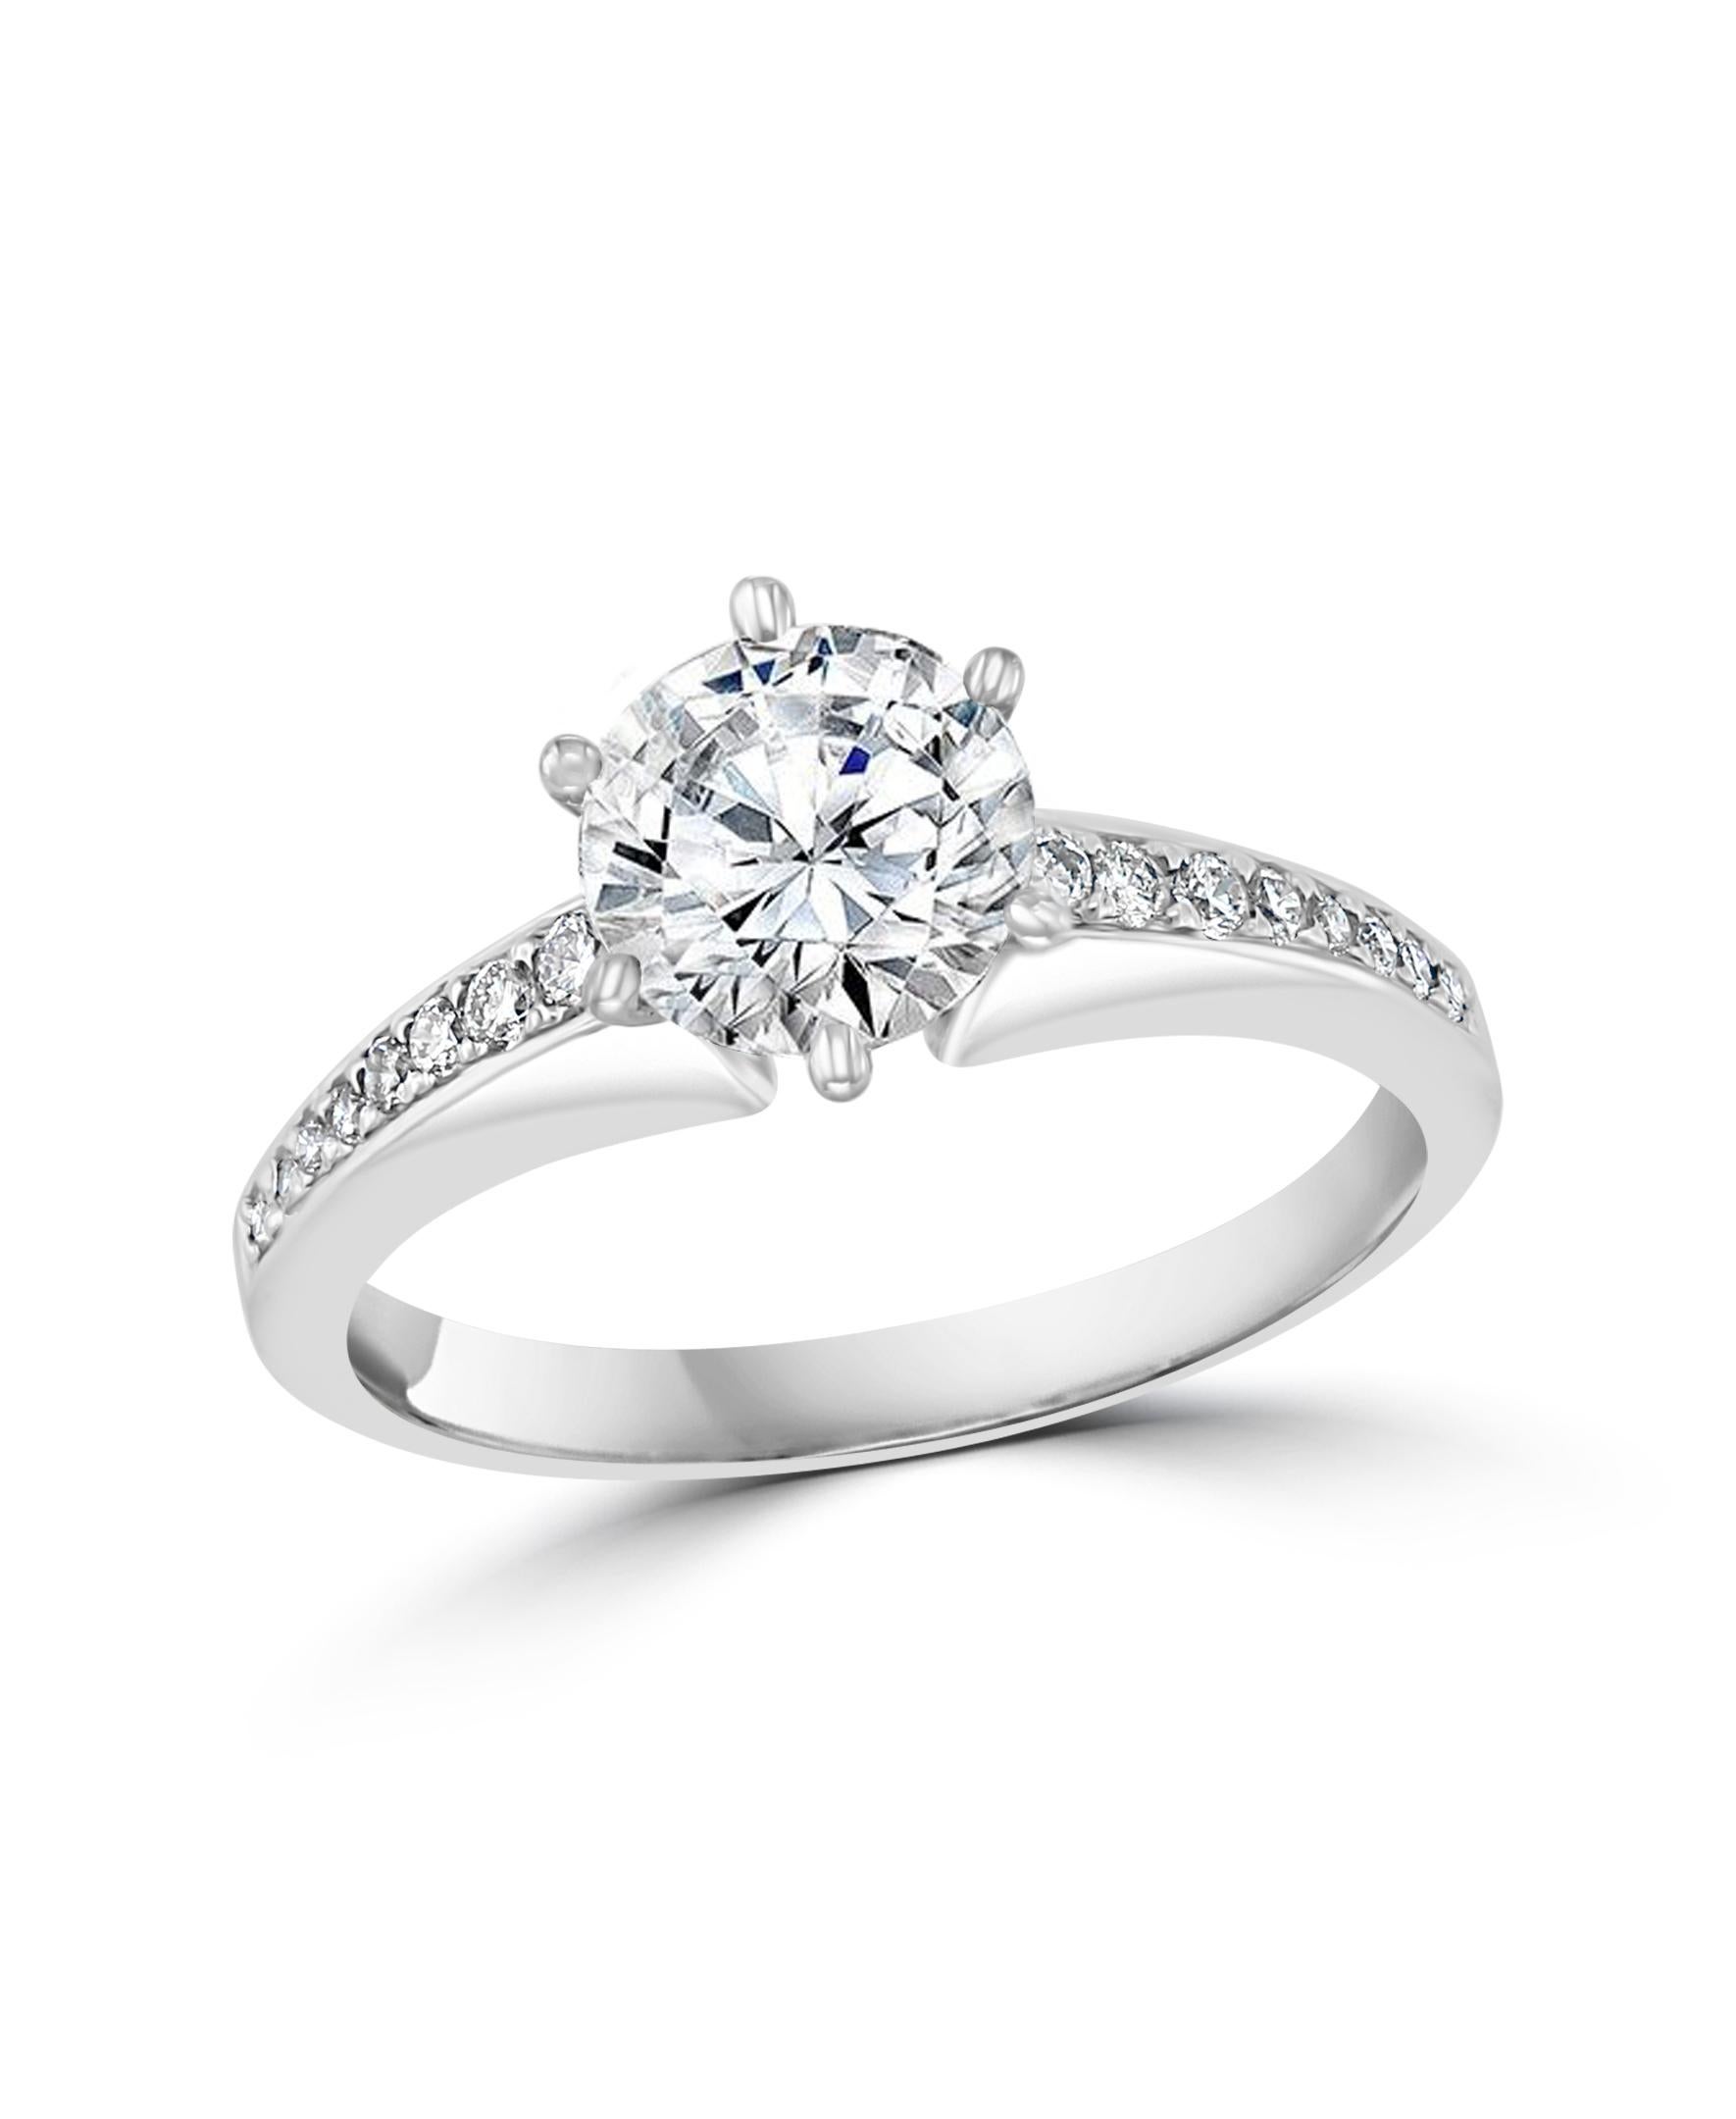 GIA Certified, 1.01 Ct VS2, E  Round Brilliant Diamond Engagement Platinum  Ring
GIA cert # 14199580
Measurements 6.33-640x3.98
Delicate and classic style ring
Platinum 3 Grams
Diamond VS 2 quality and E color.
There are  more brilliant cut diamonds